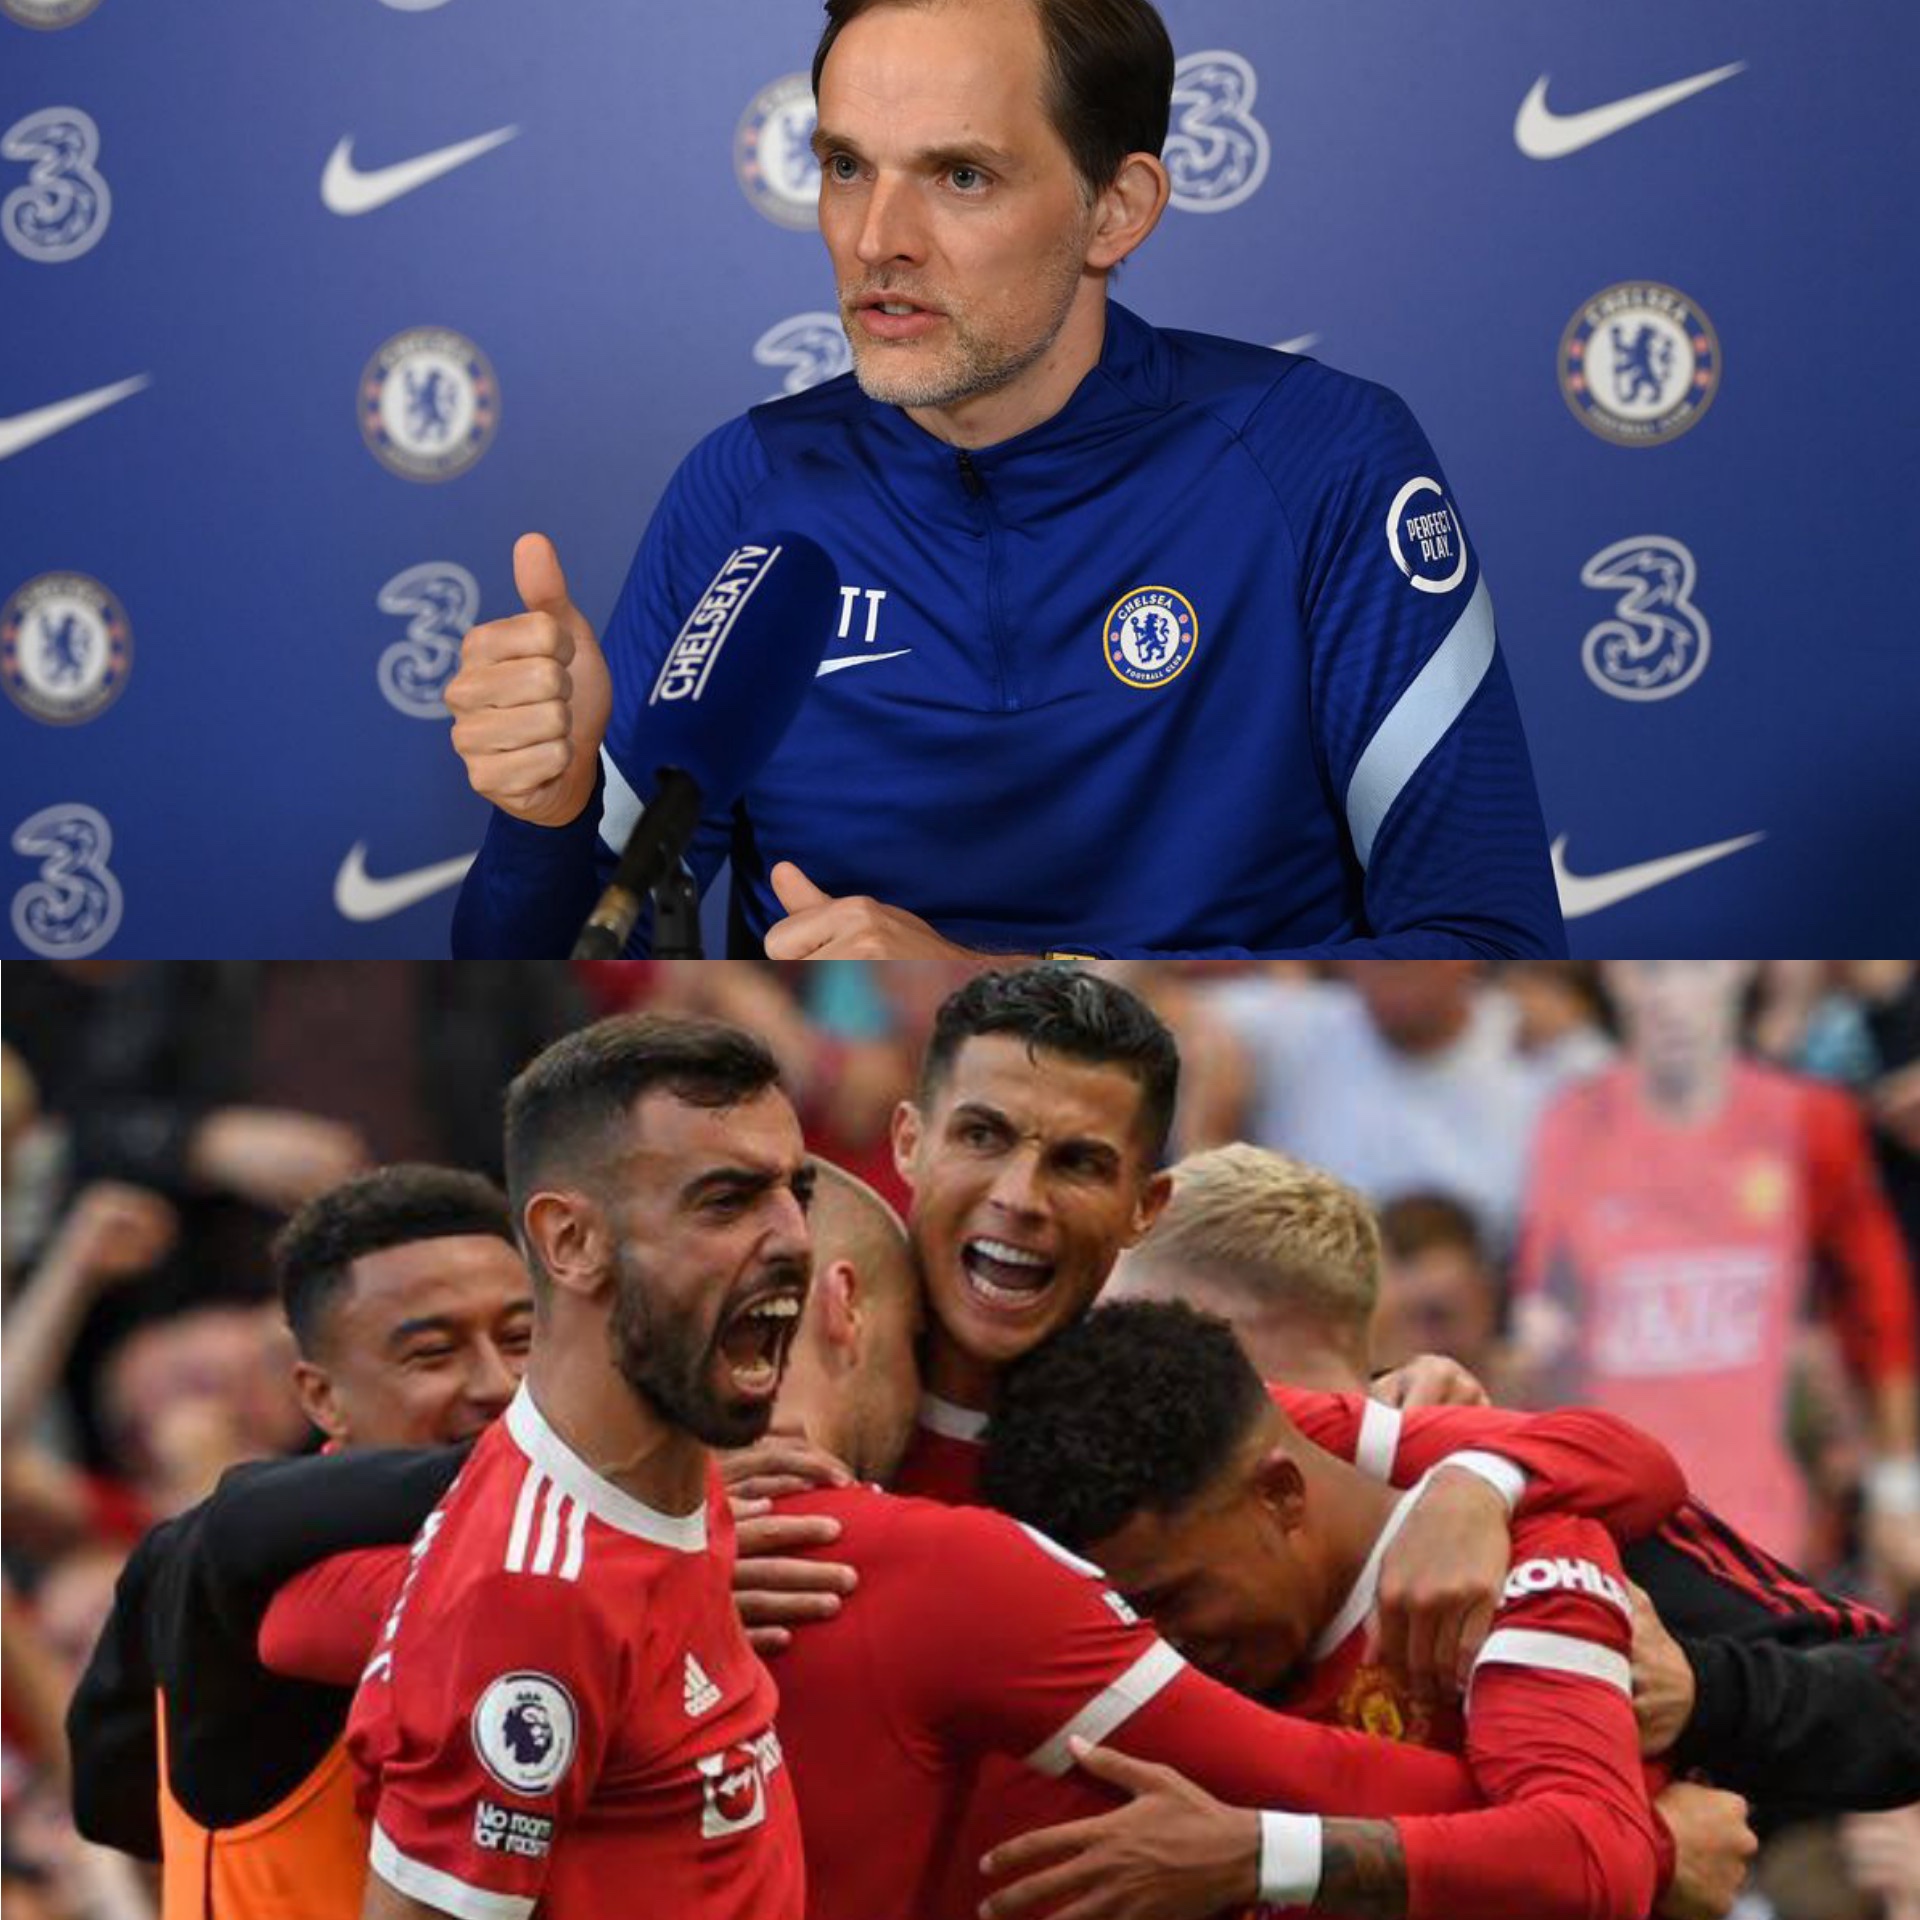 This Is the best time to crush Manchester United – Chelsea coach Thomas Tuchel says ahead of must win premier league clash